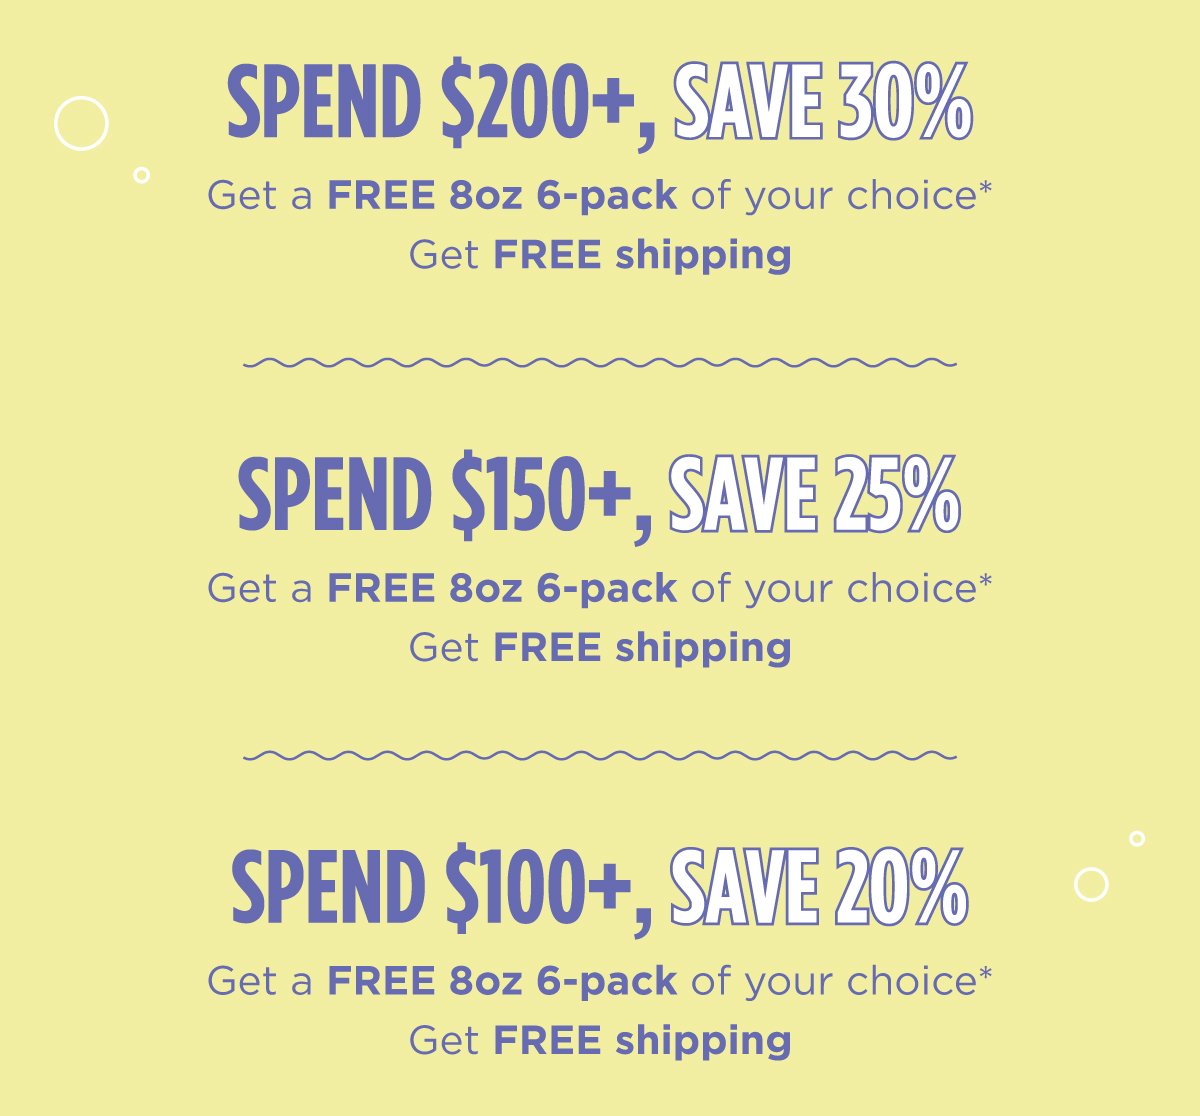 Spend \\$100+ get 20% off + free cann 8oz 6 pack of choice + free shipping Spend \\$150+ get 25% off + free cann 8oz 6 pack of choice + free shipping Spend \\$200+ get 30% off + free cann 8oz 6 pack of choice + free shipping